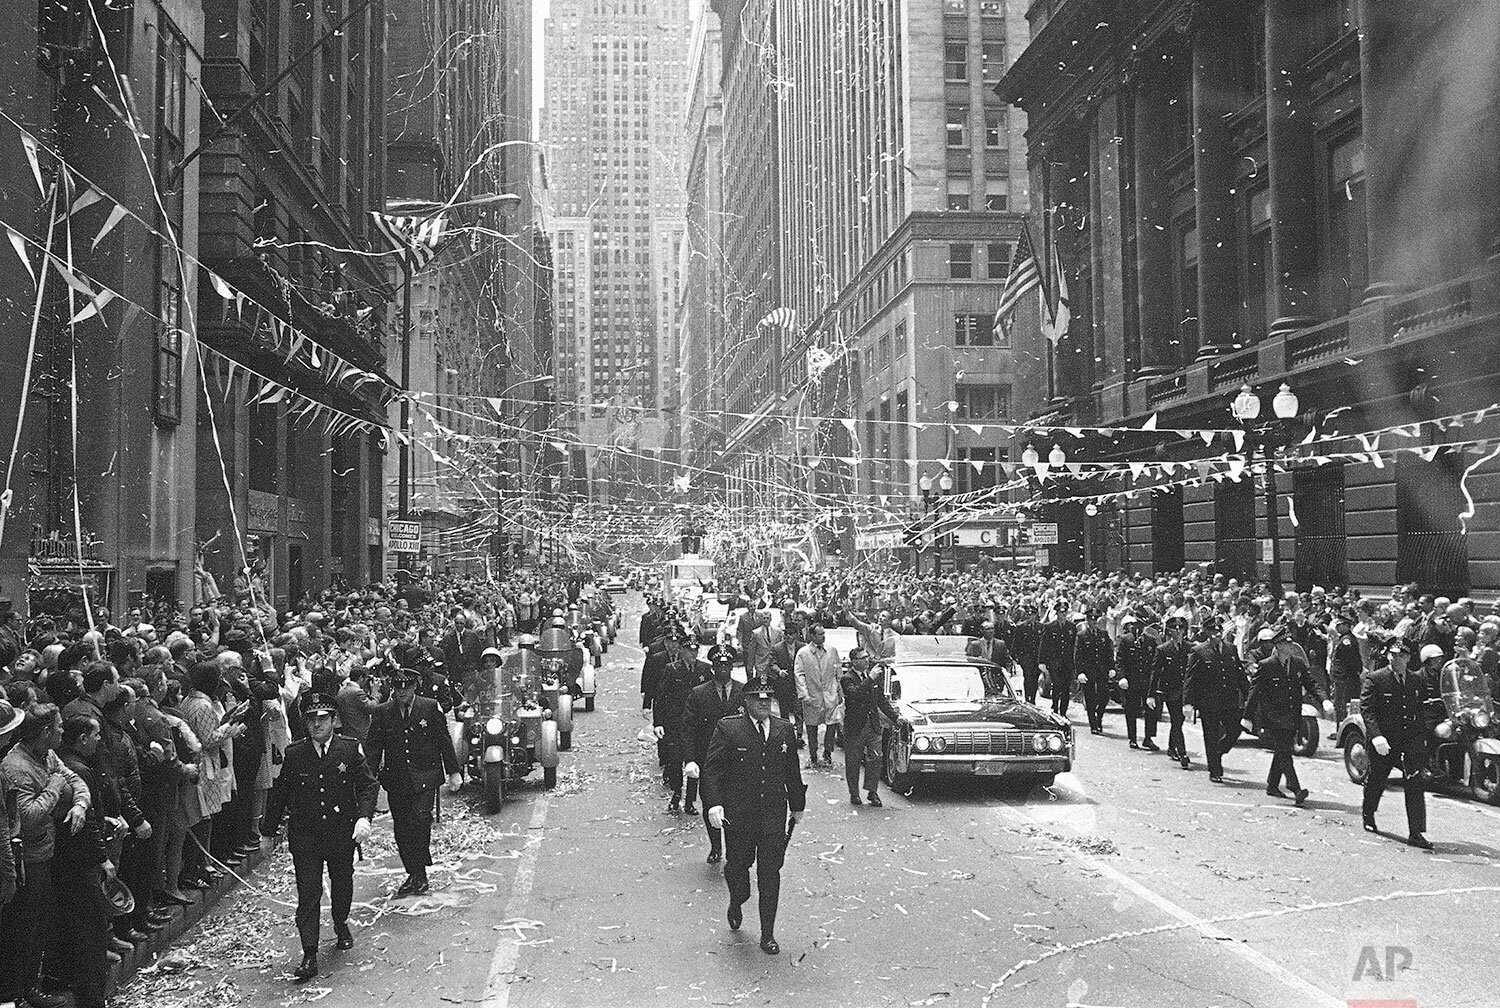  Confetti pours from the skyscrapers in Chicago’s financial district, May 1, 1970 as Apollo 13 astronauts John Swigert Jr., and James Lovell ride in a motorcade during a parade in their honor. (AP Photo) 